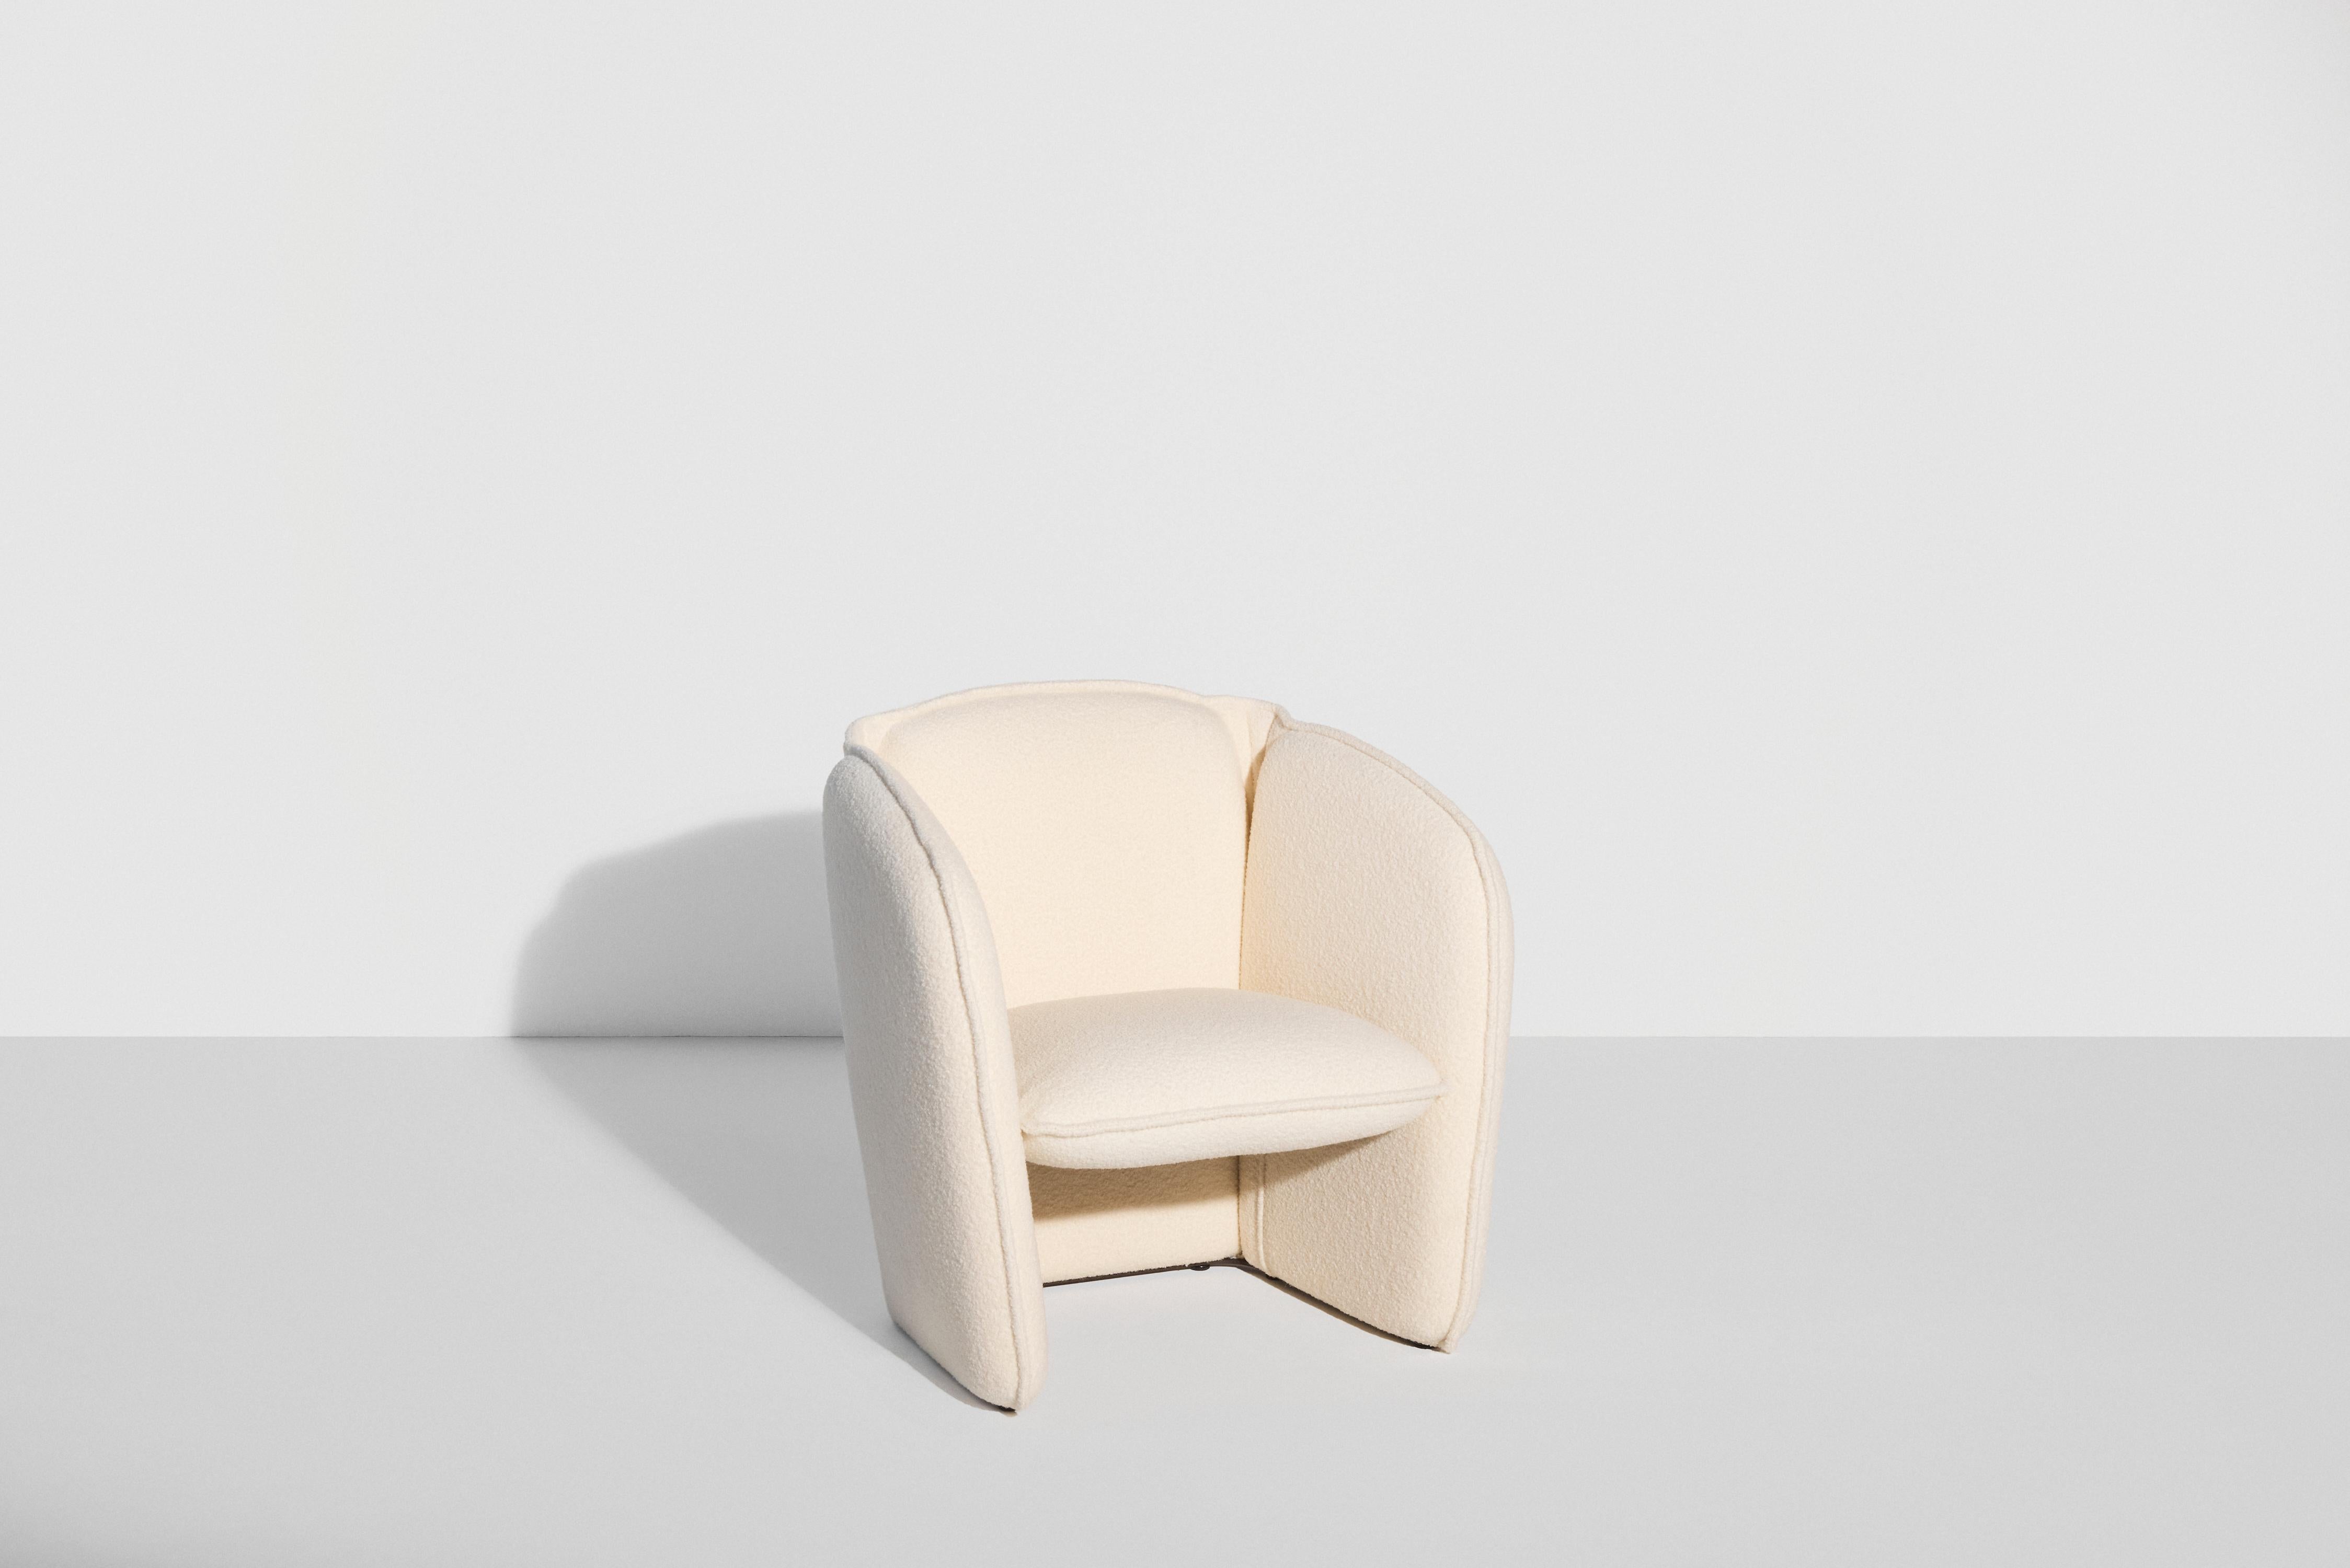 European Petite Friture Lily Armchair in White by Färg & Blanche, 2022 For Sale